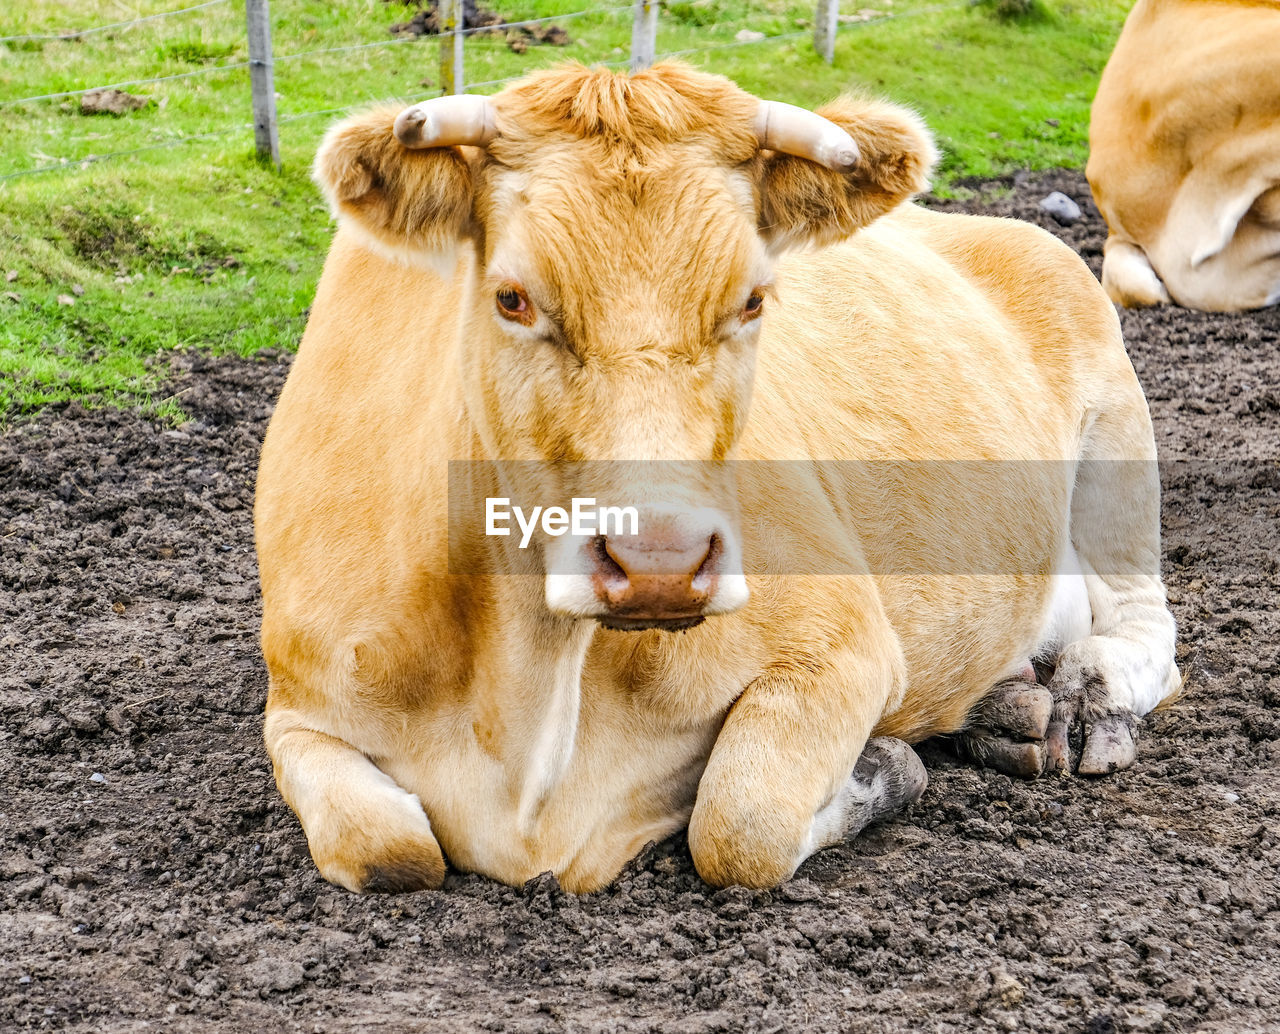 Portrait of a cow relaxing on field